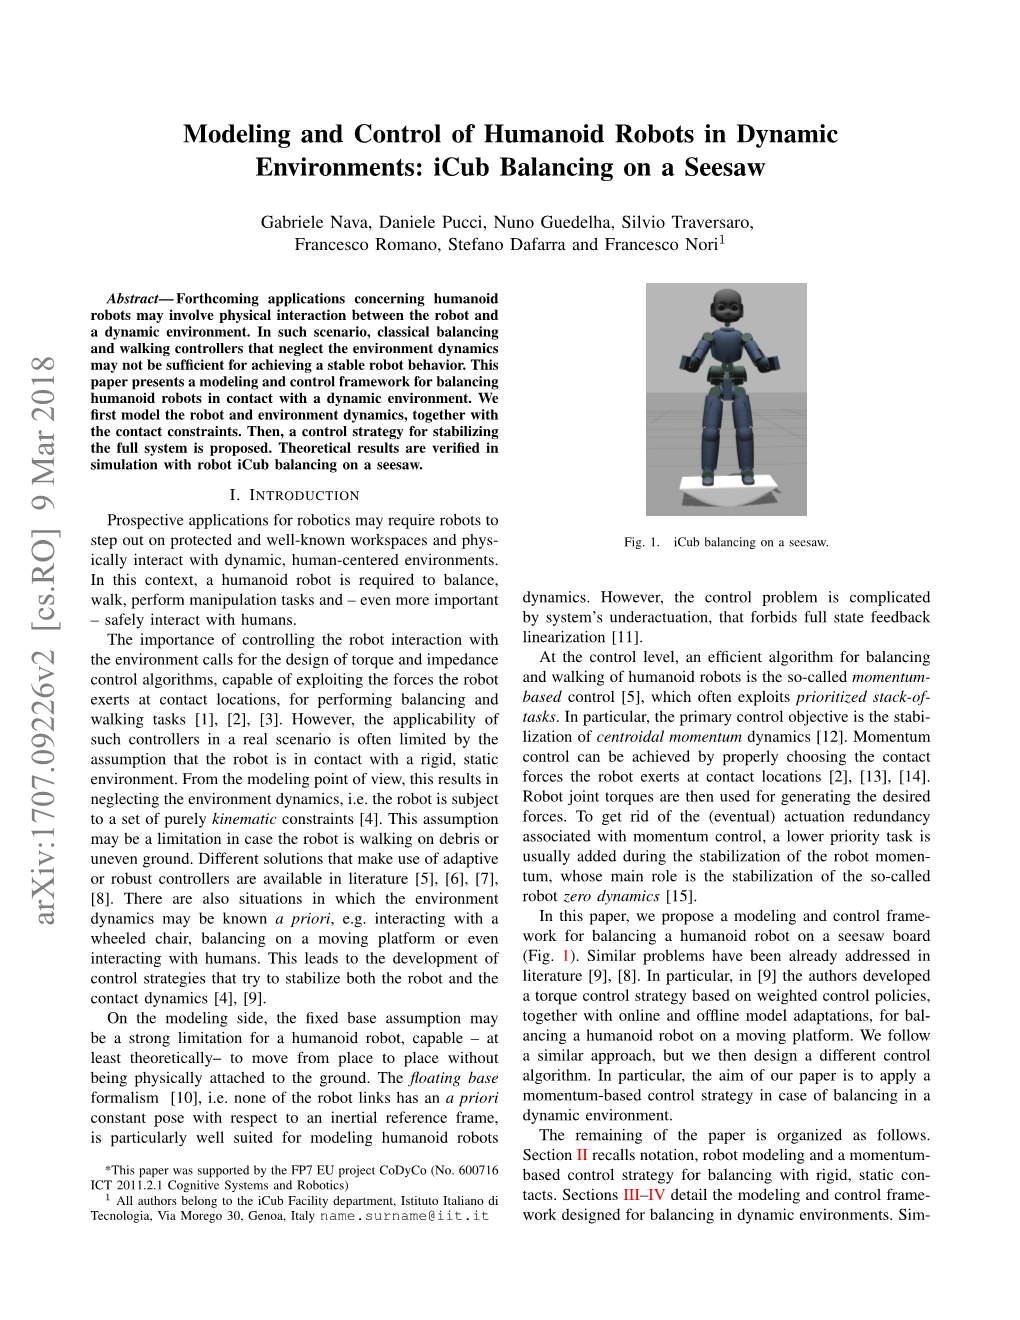 Modeling and Control of Humanoid Robots in Dynamic Environments: Icub Balancing on a Seesaw